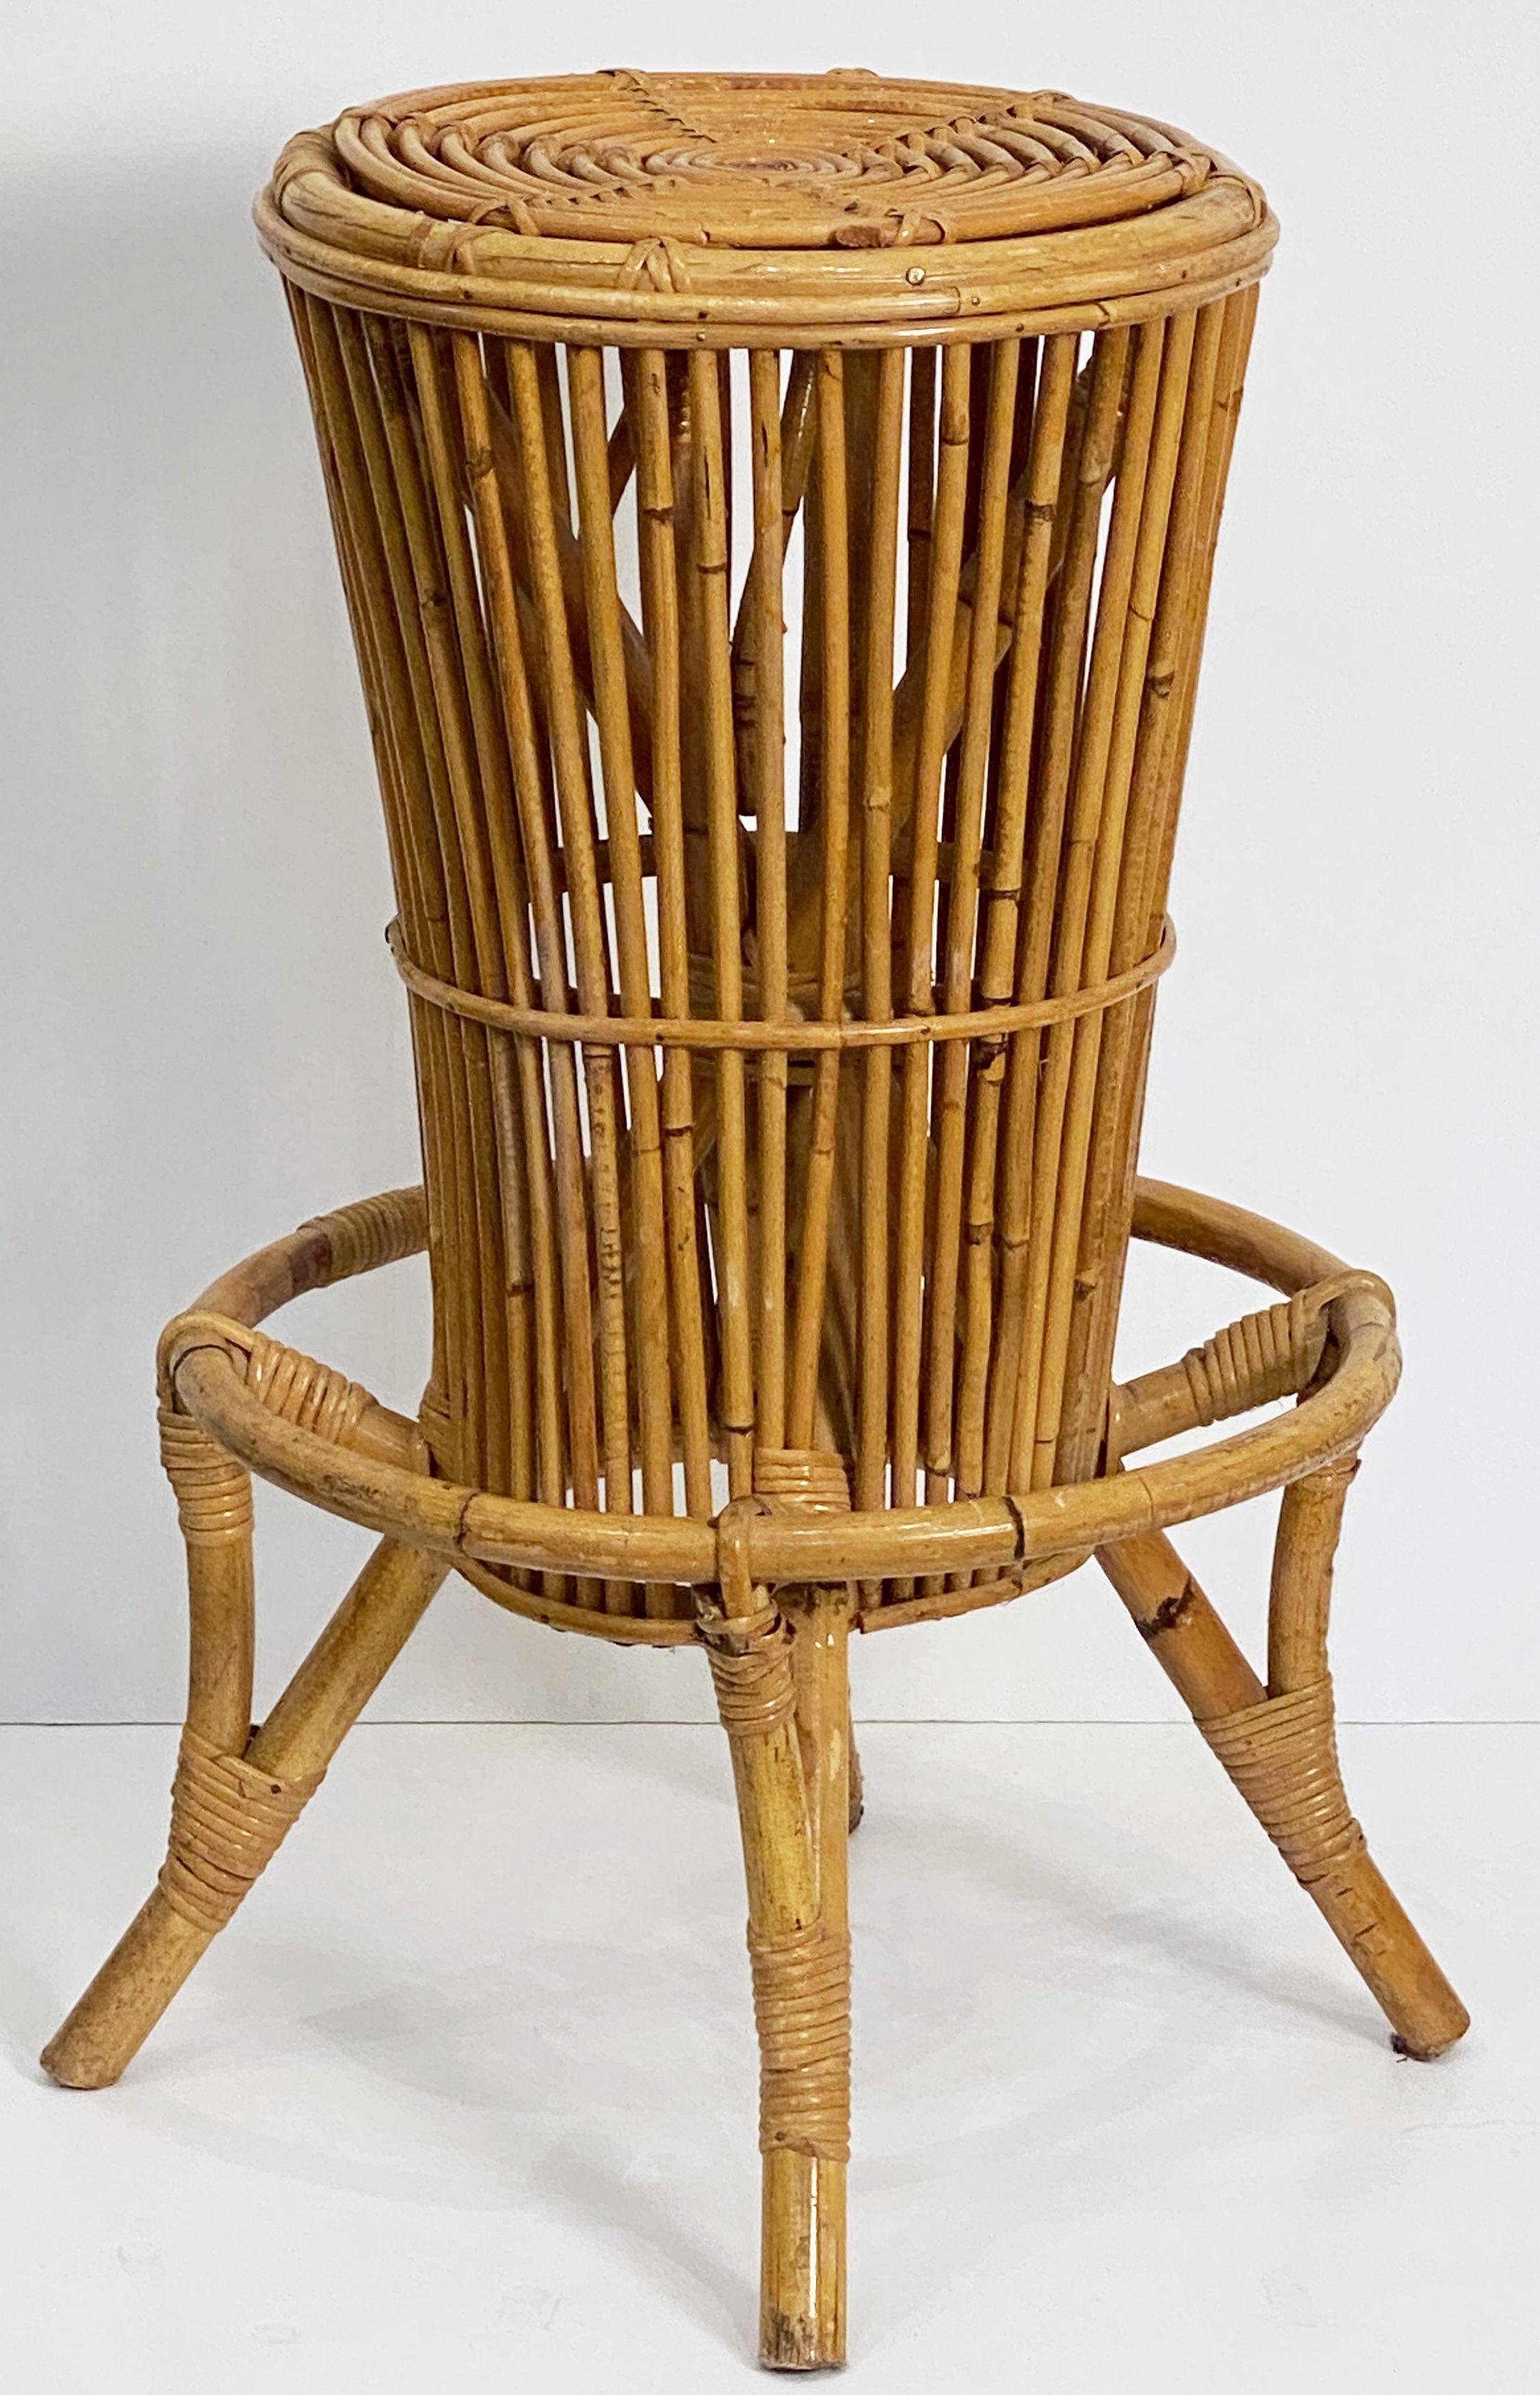 Mid-Century Modern Italian Stool of Rattan and Bamboo from the Mid-20th Century For Sale